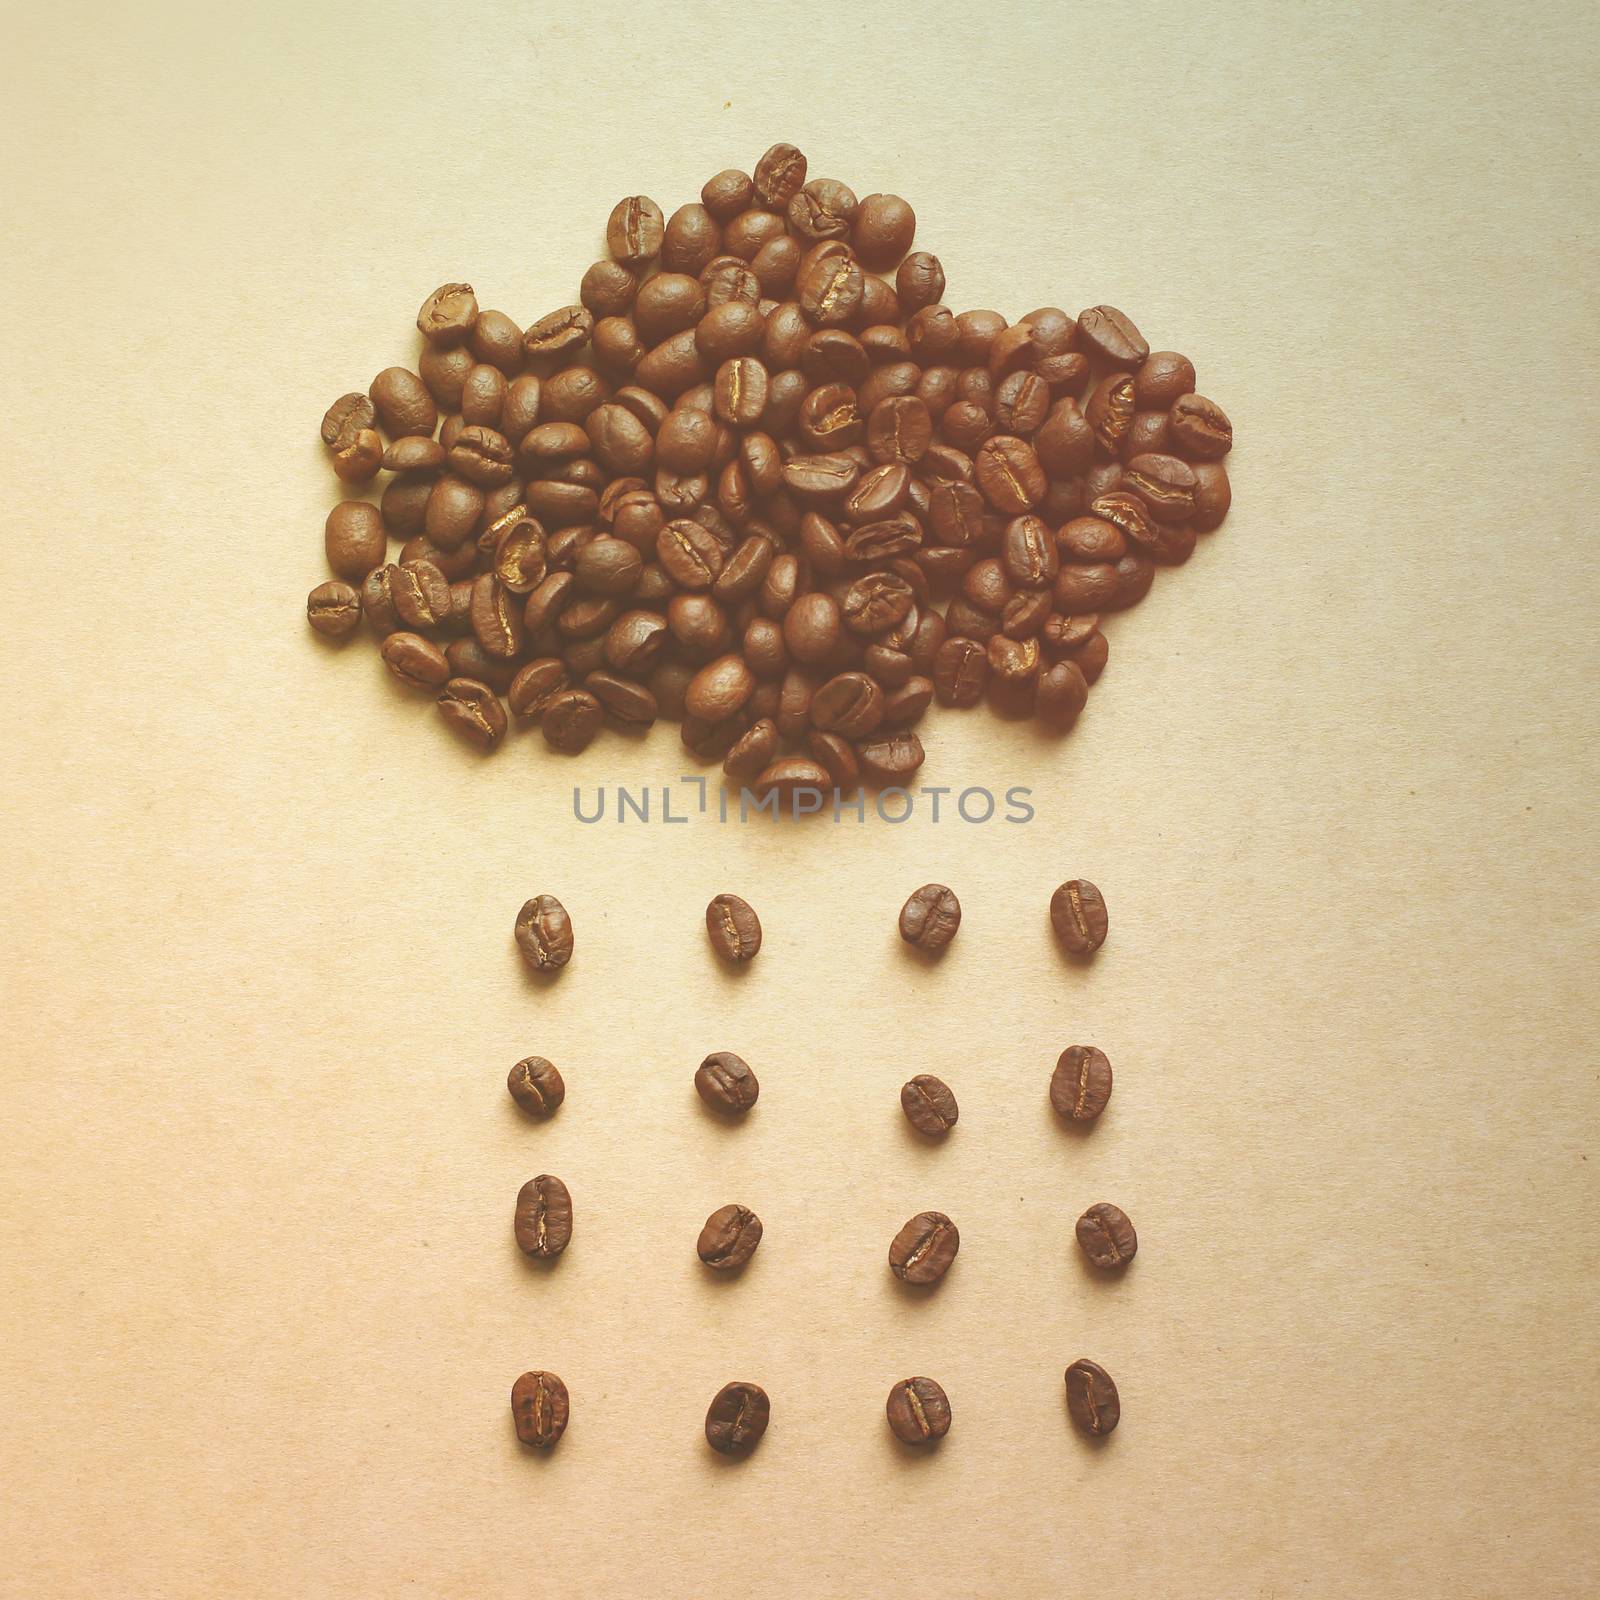 Cloud and rain from coffee beans with retro filter effect